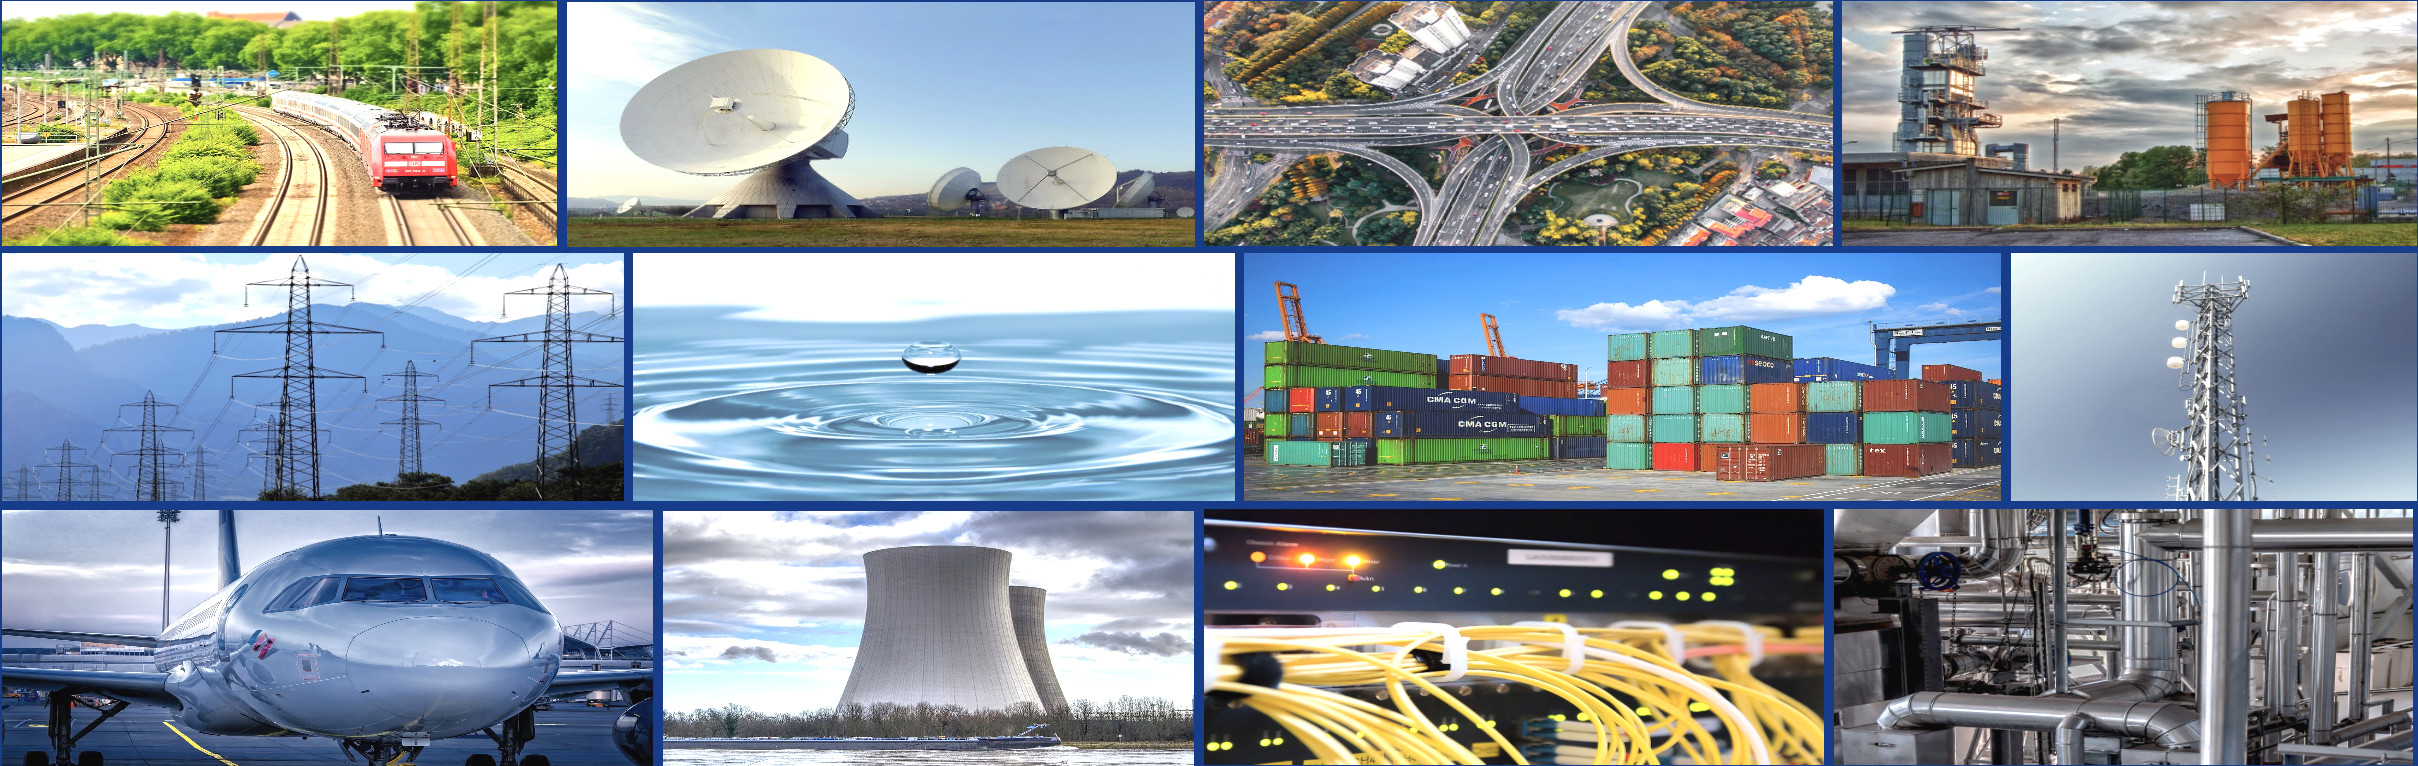 banner for: Critical Infrastructure Protection & Resilience Newsletter